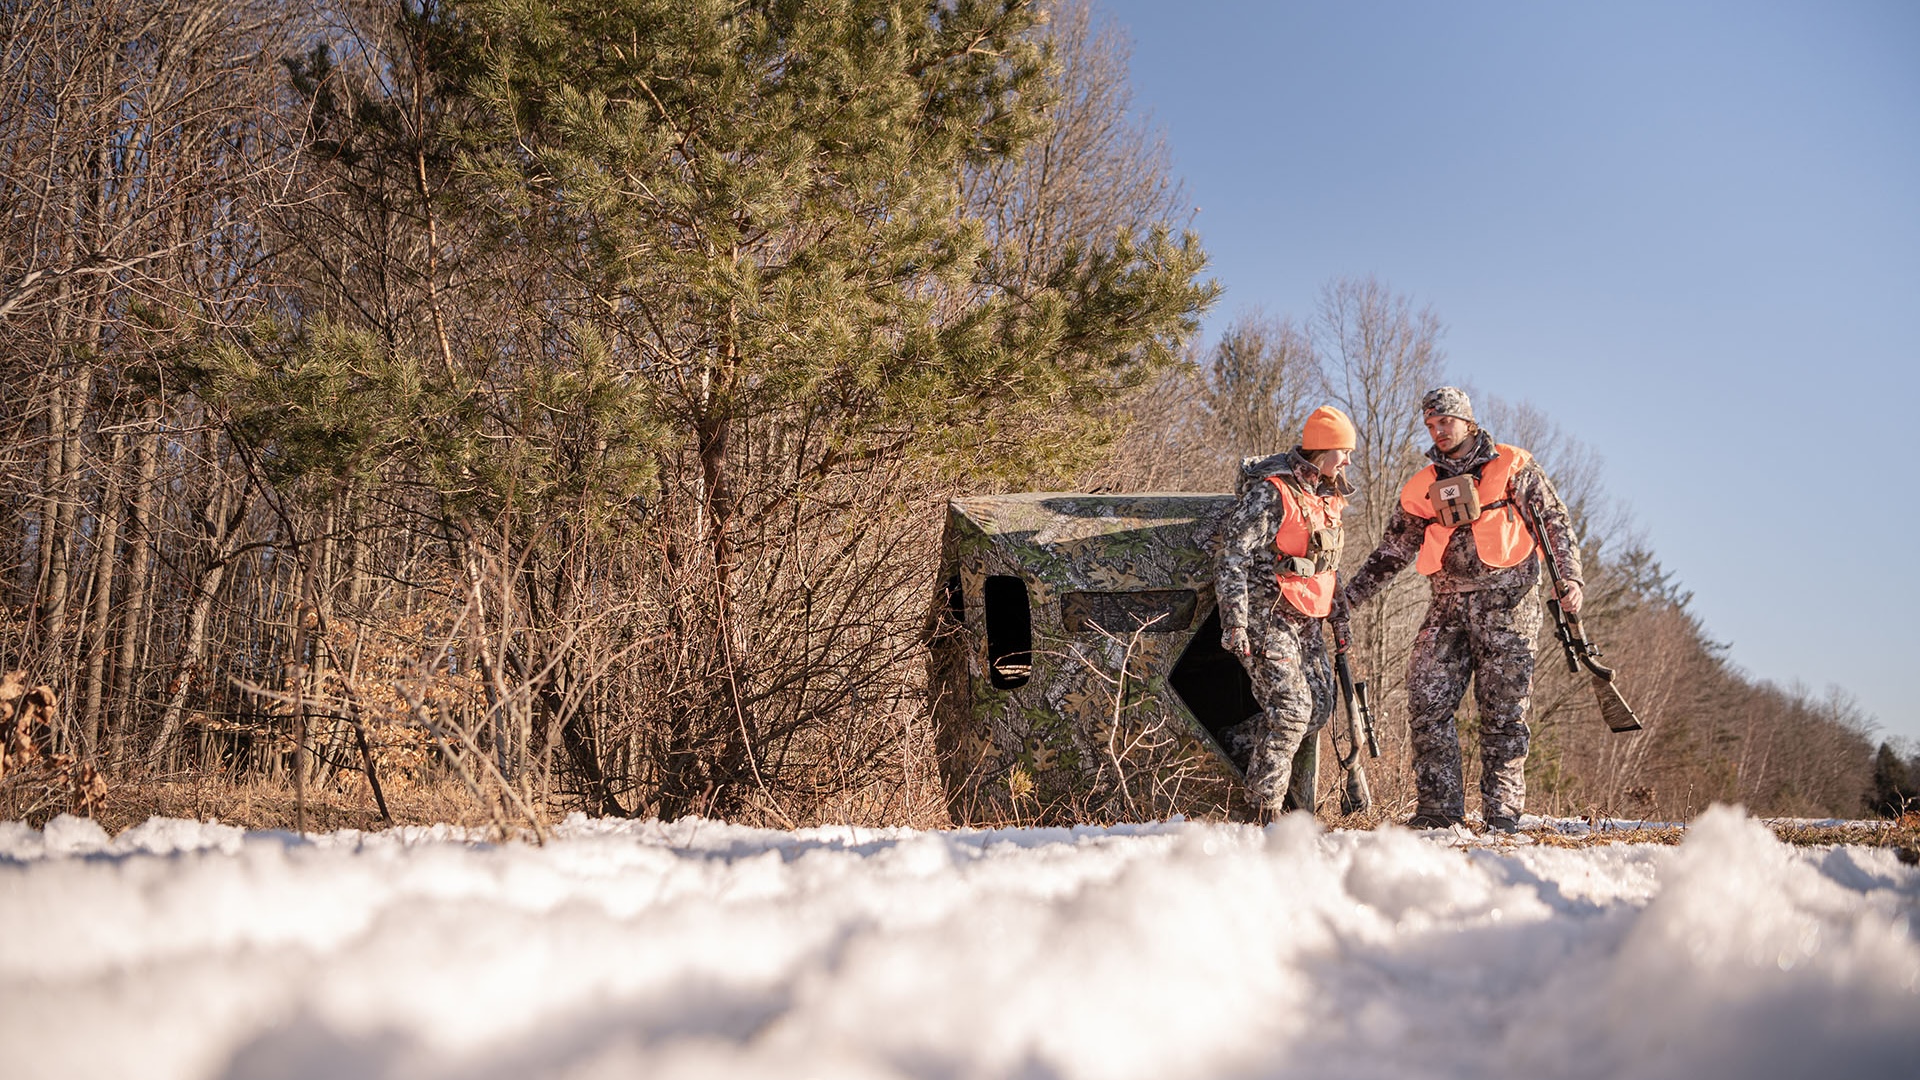 Michigan outdoors enthusiasts get good news in tally of hunting and fishing license sales as firearm deer season arrives